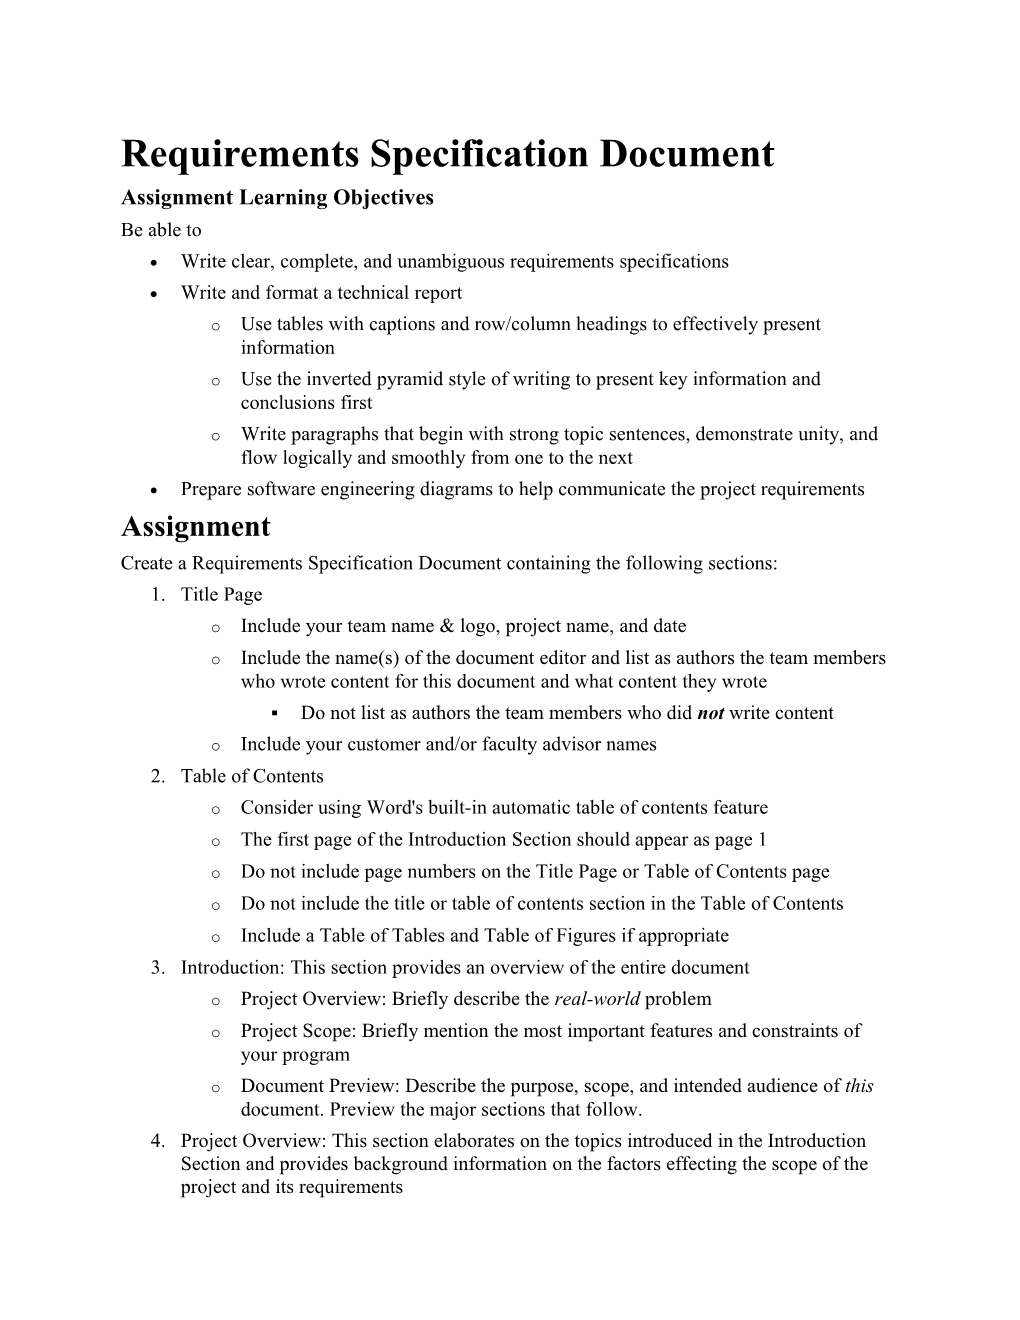 CS 480 Assignment: Requirements Specification Document